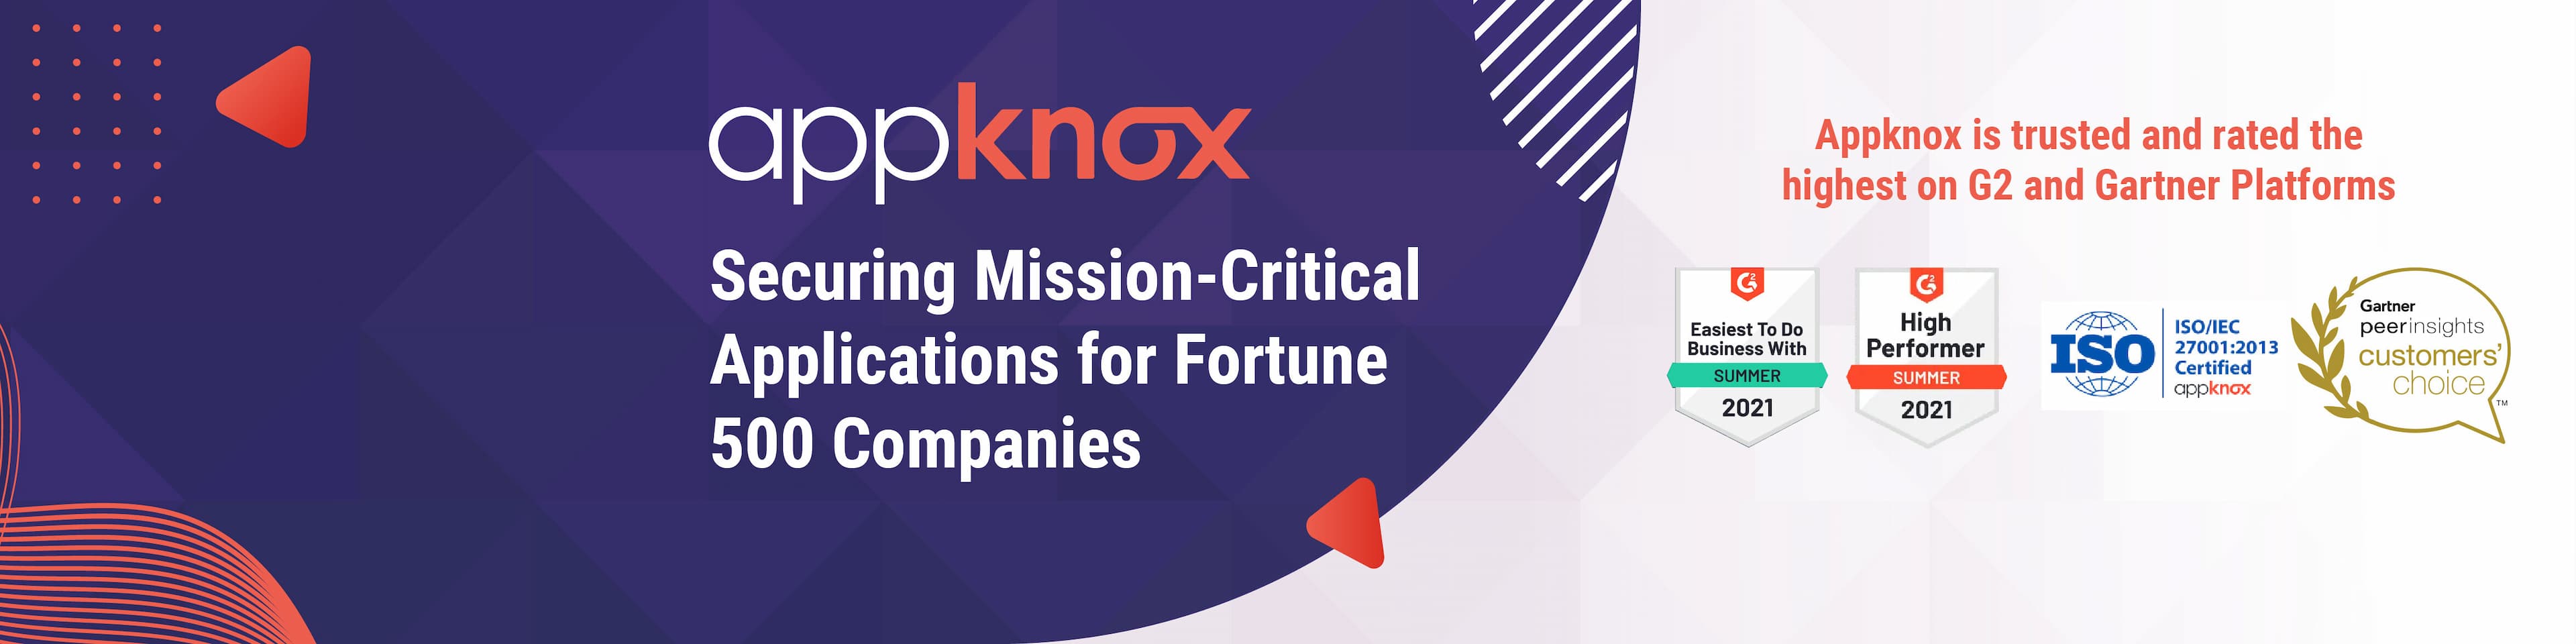 Appknox cover picture